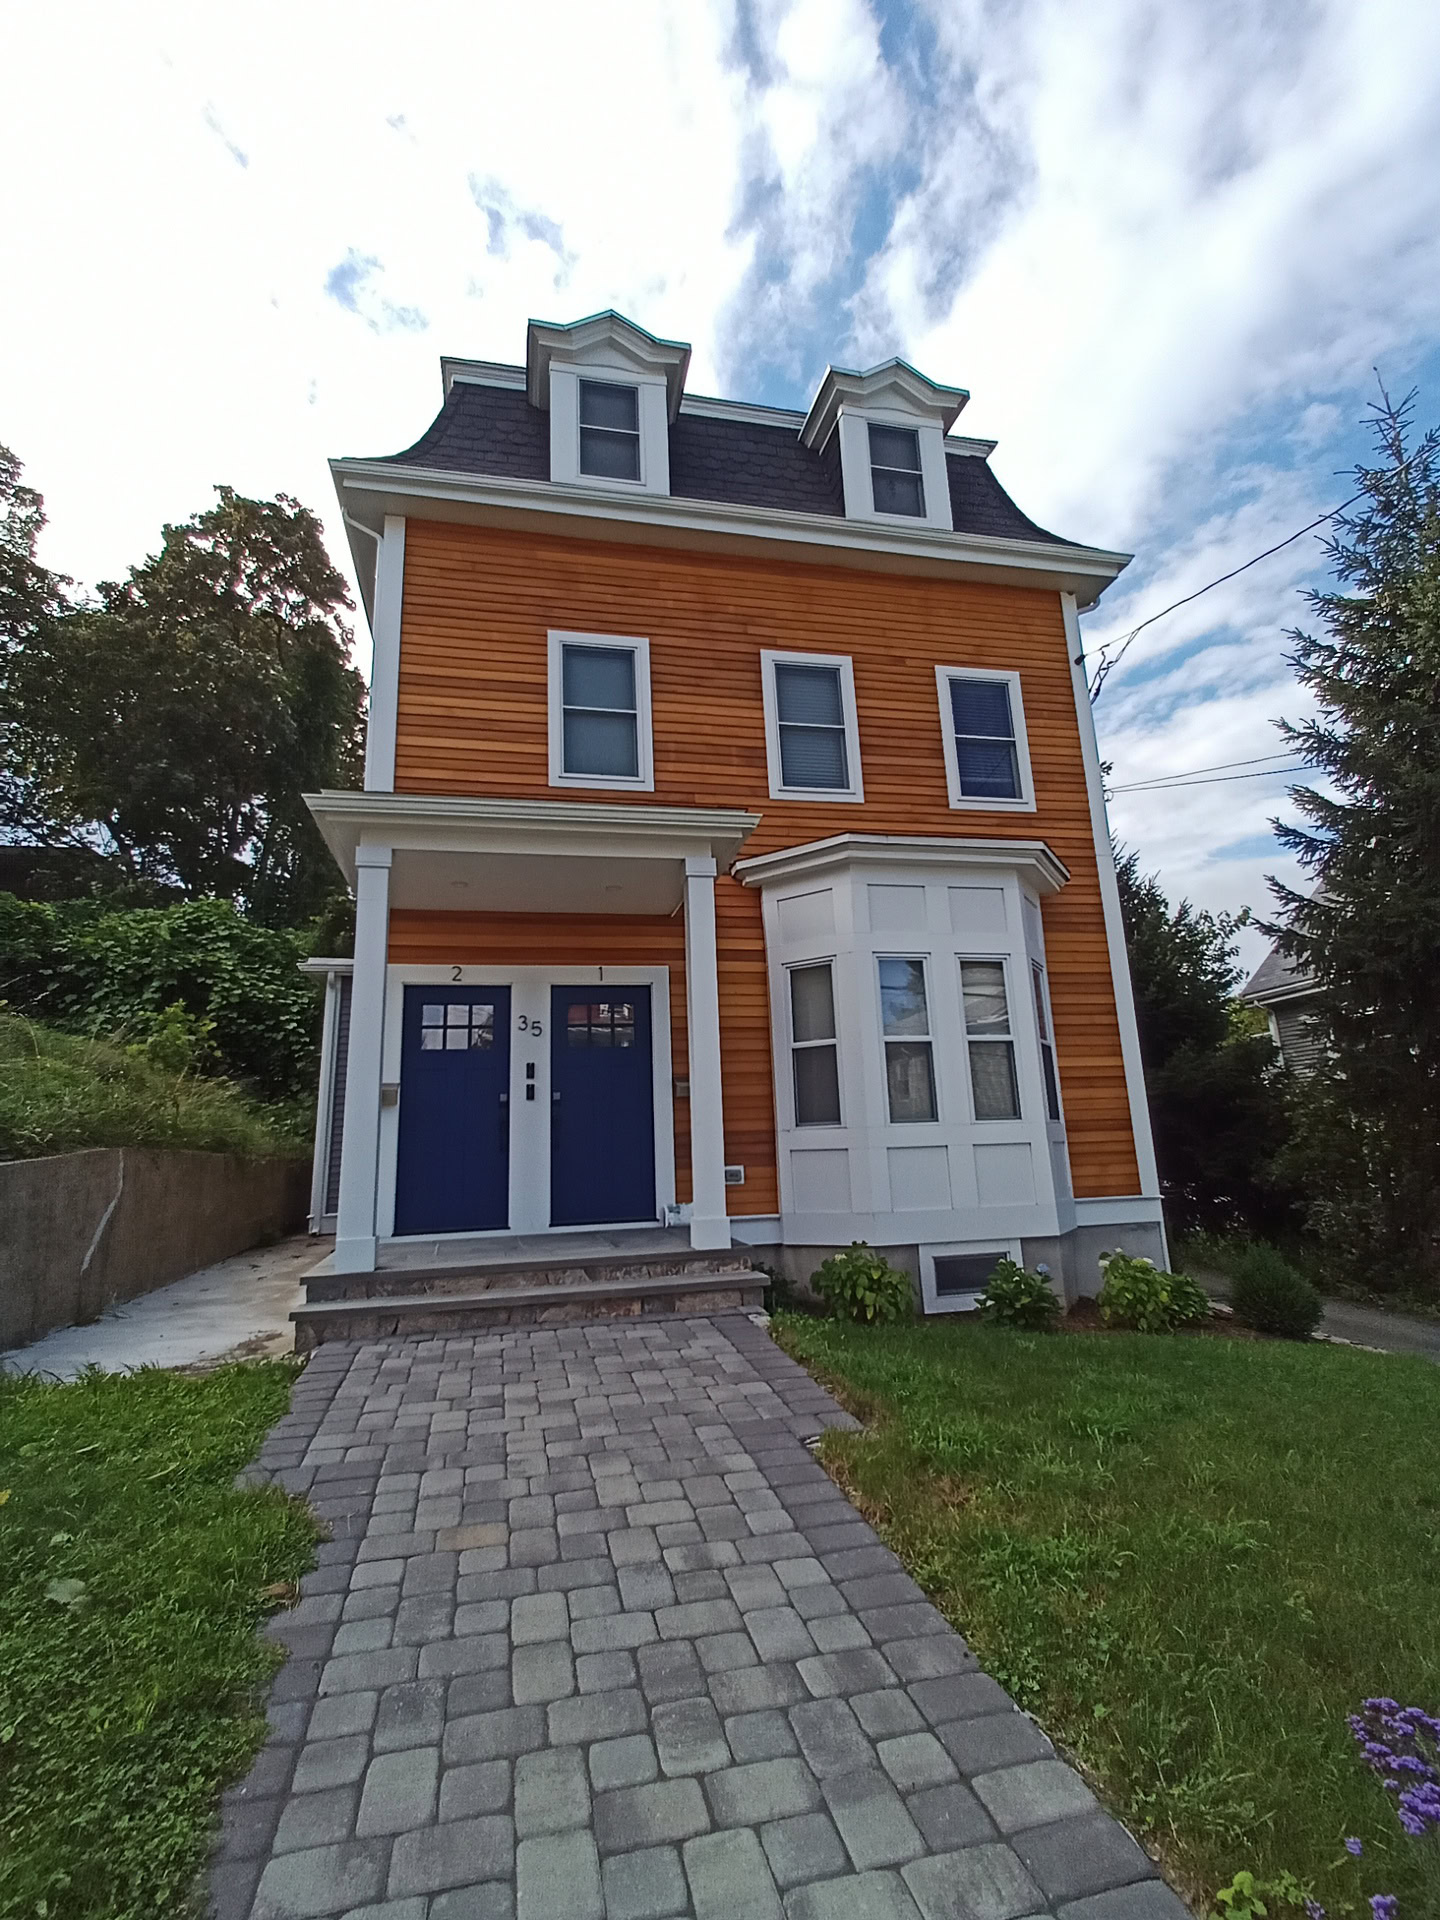 Picture of exterior of house in Massachusetts taken on Blu G91 Pro